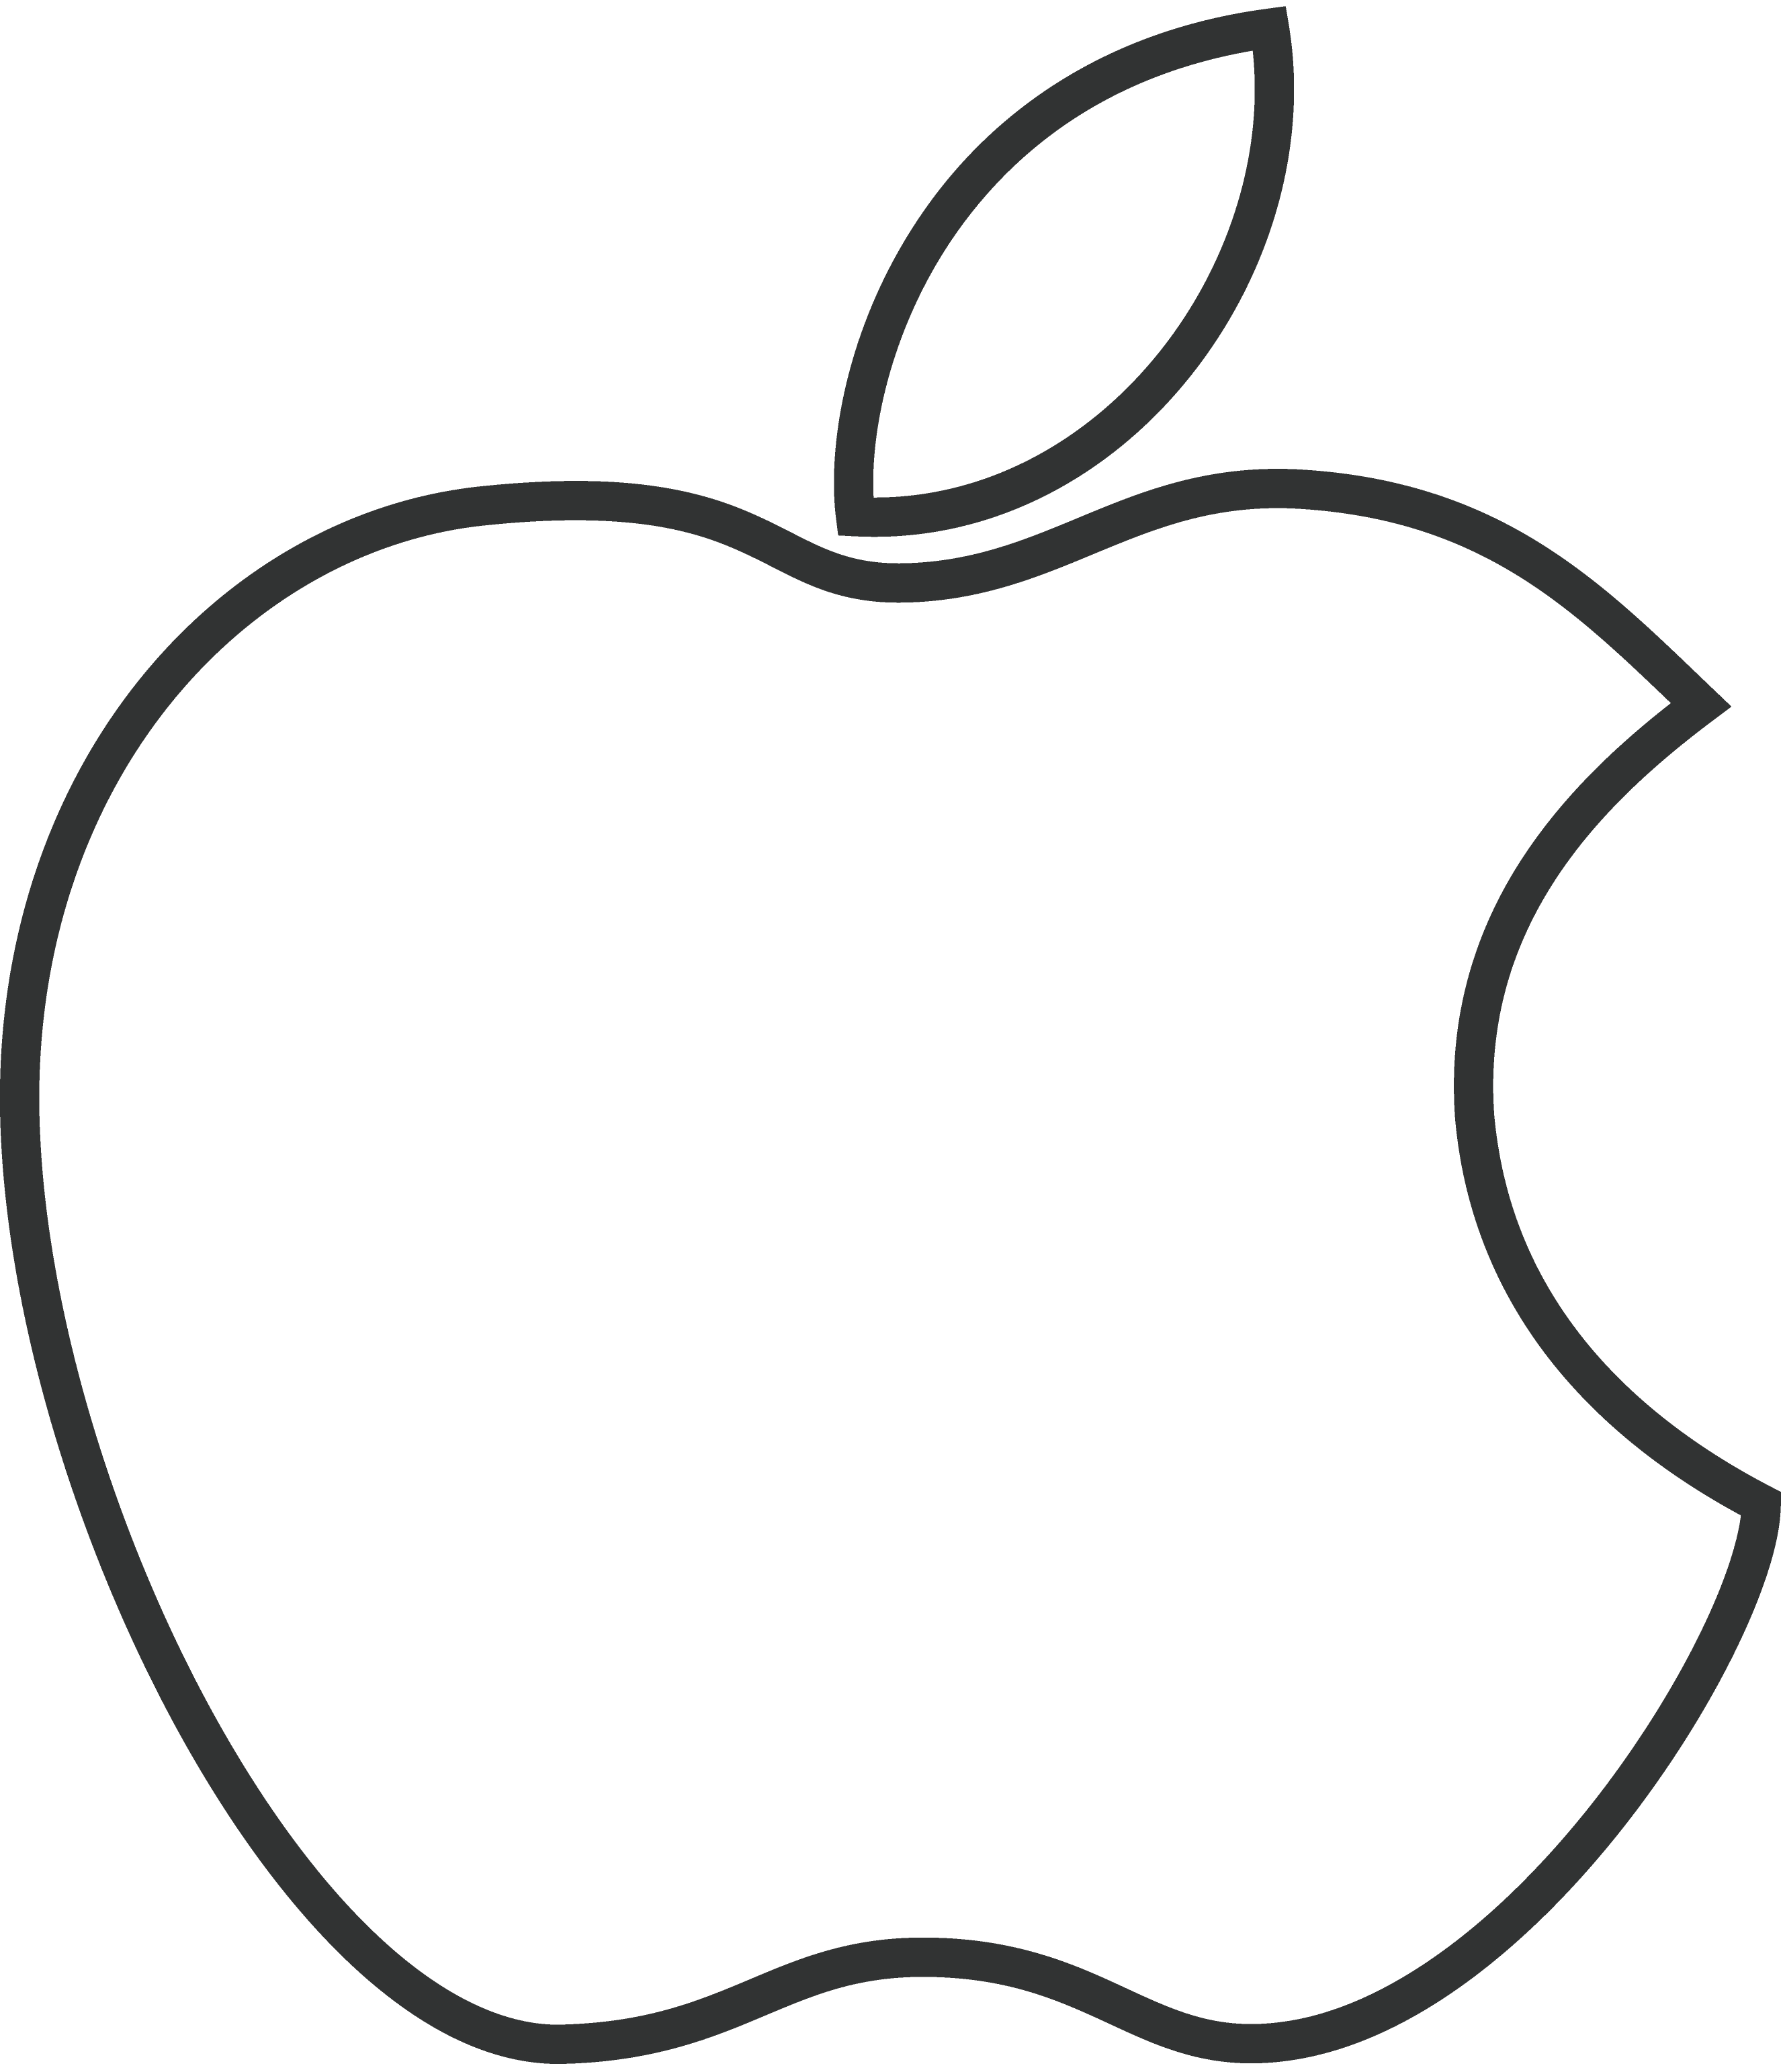 Apple System Decal Iphone Maintenance Logo PNG Image